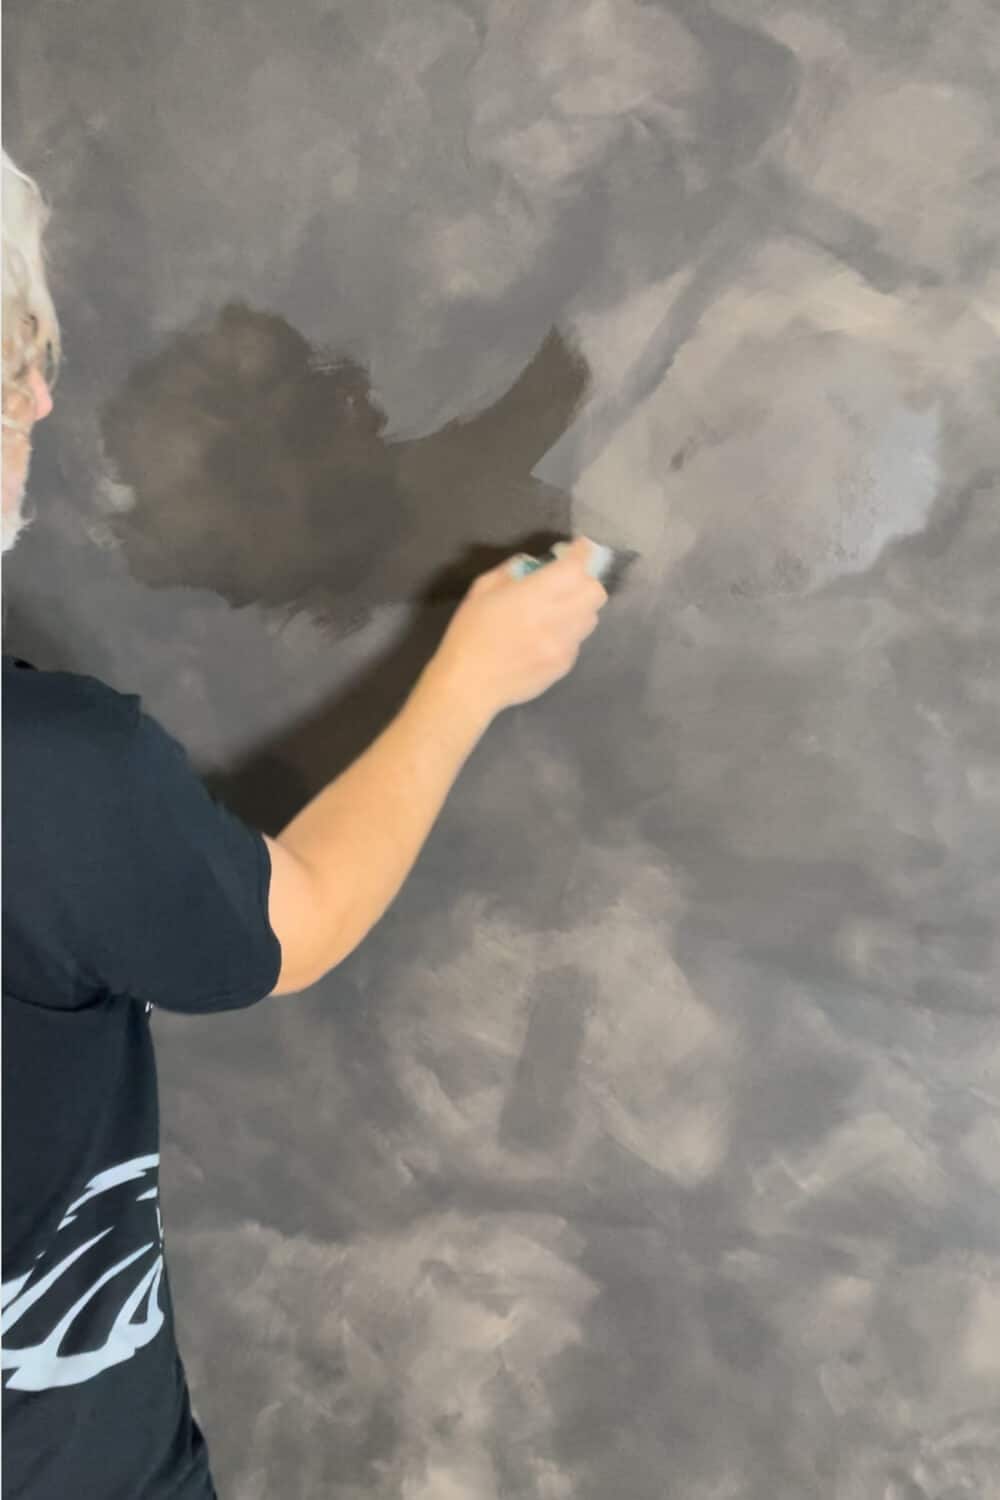 black wall being limewashed by man with gray hair